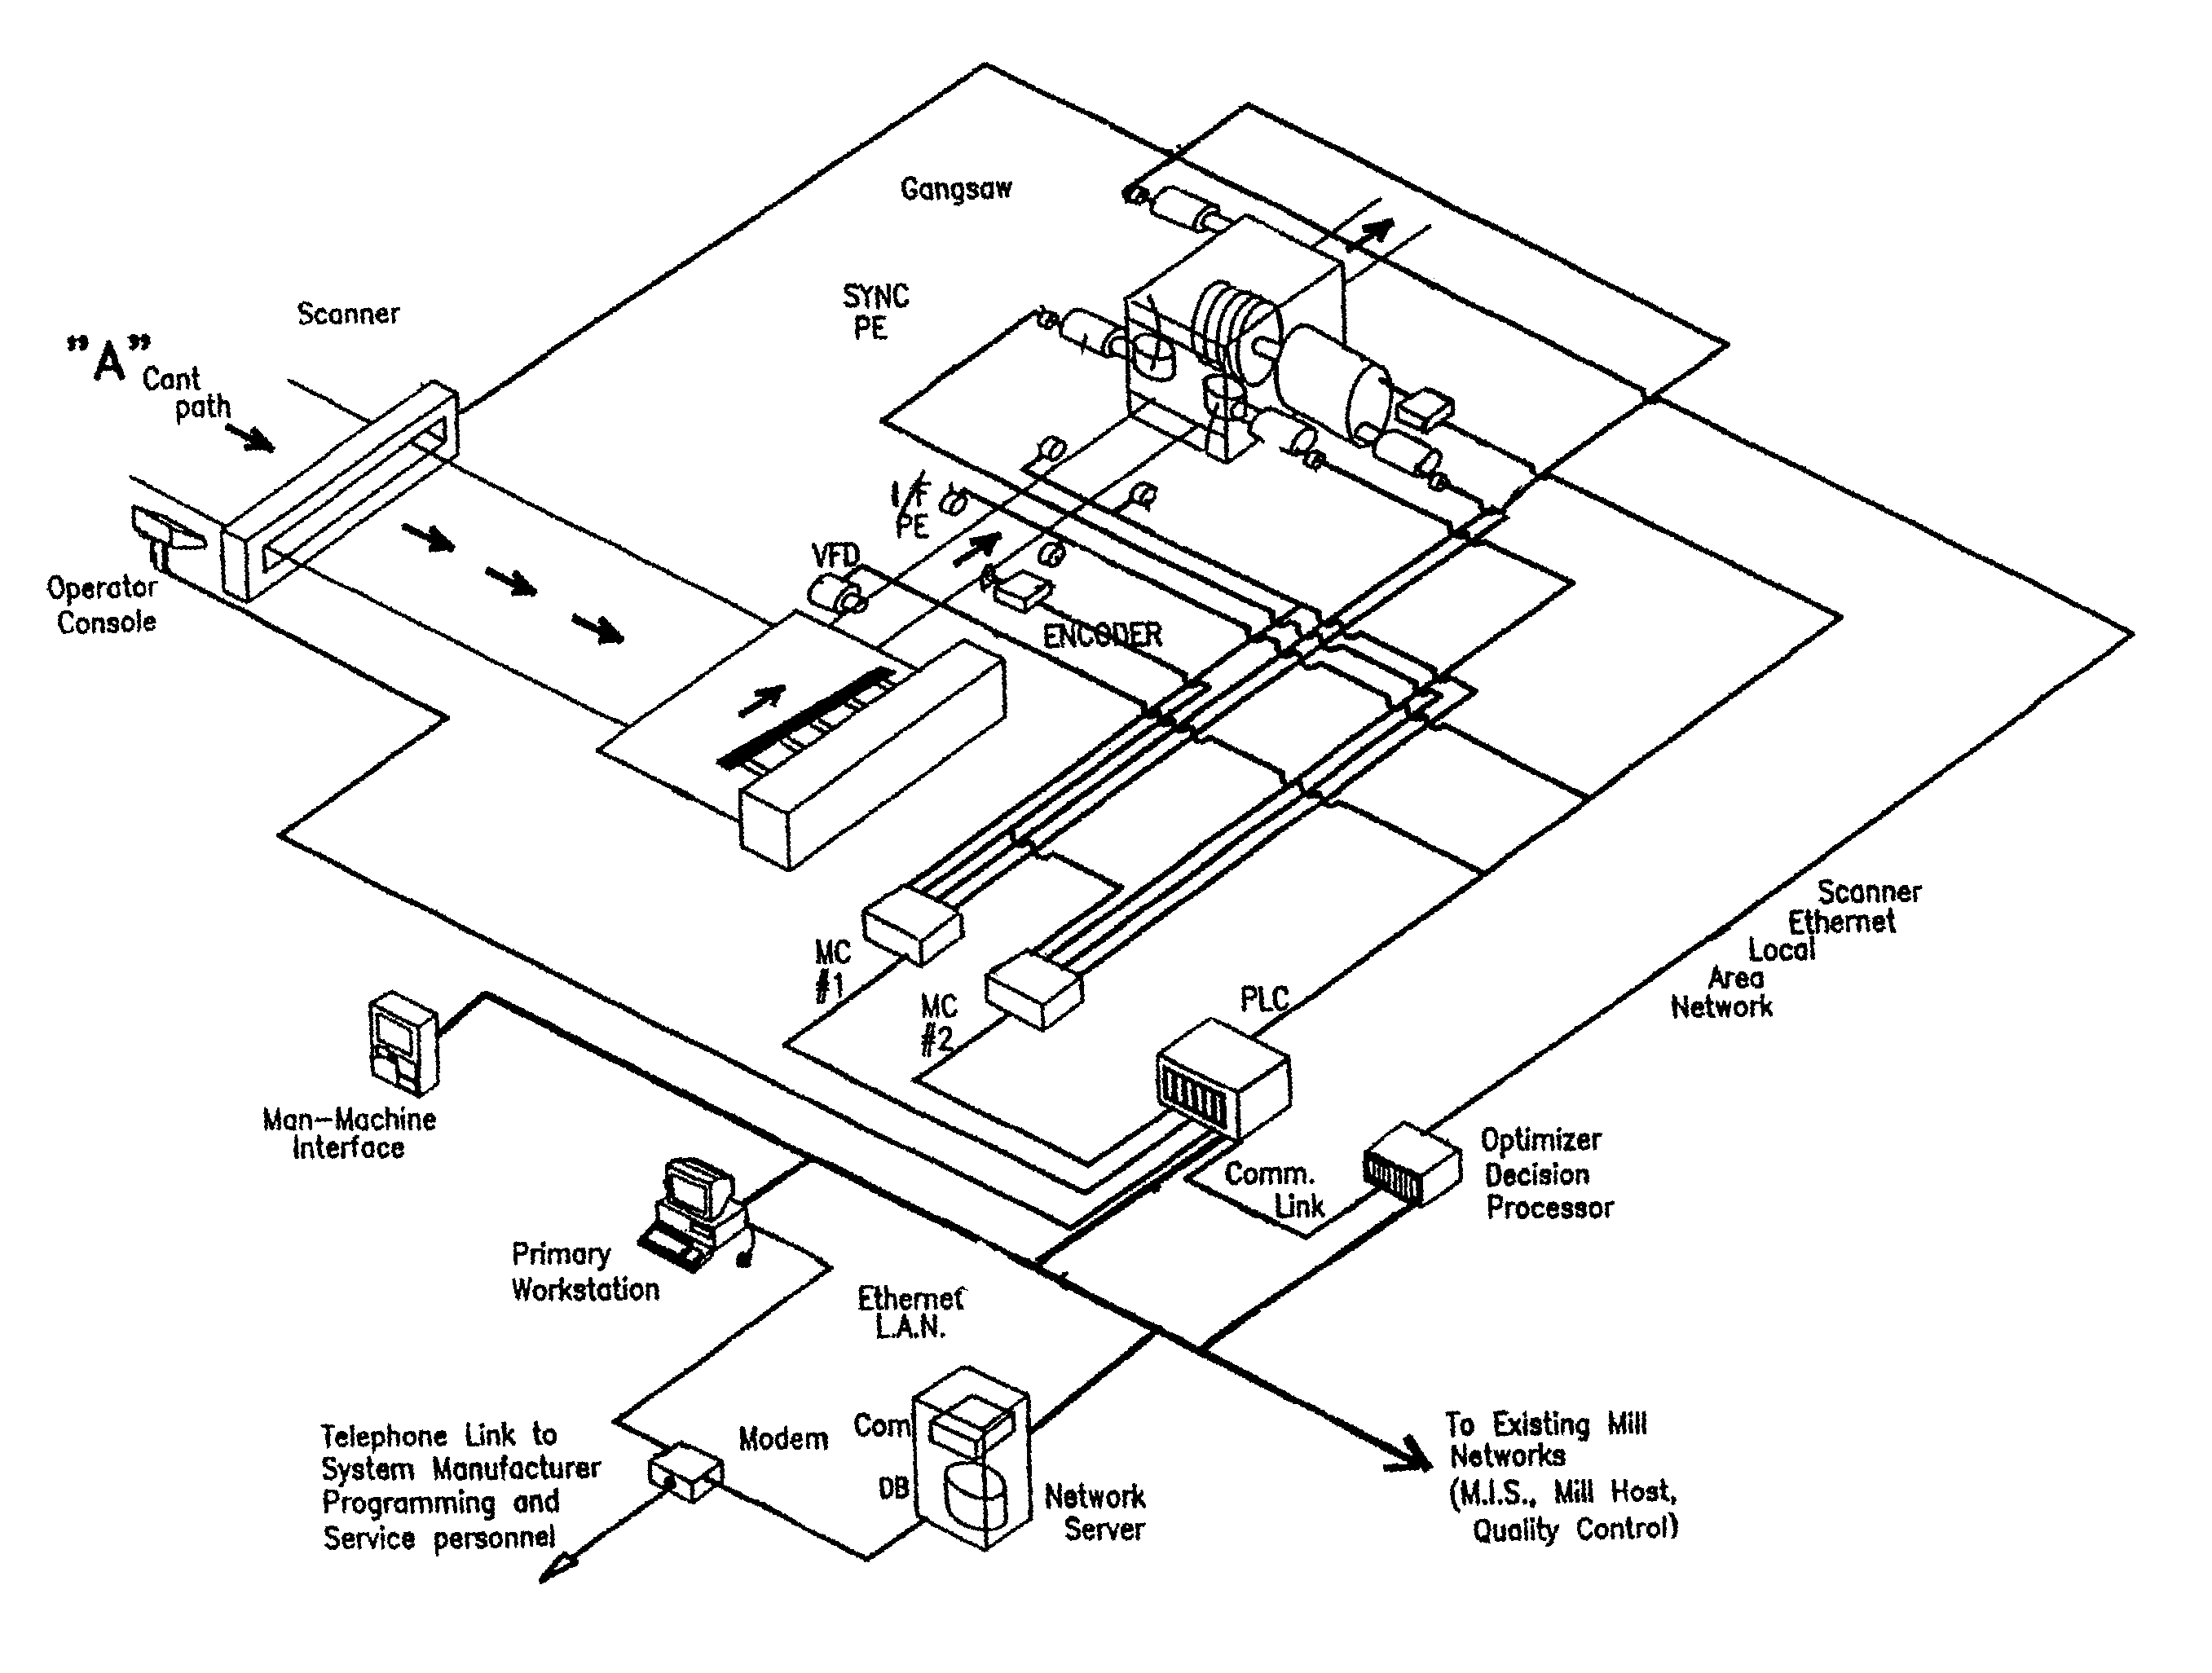 Apparatus for sawing a workpiece